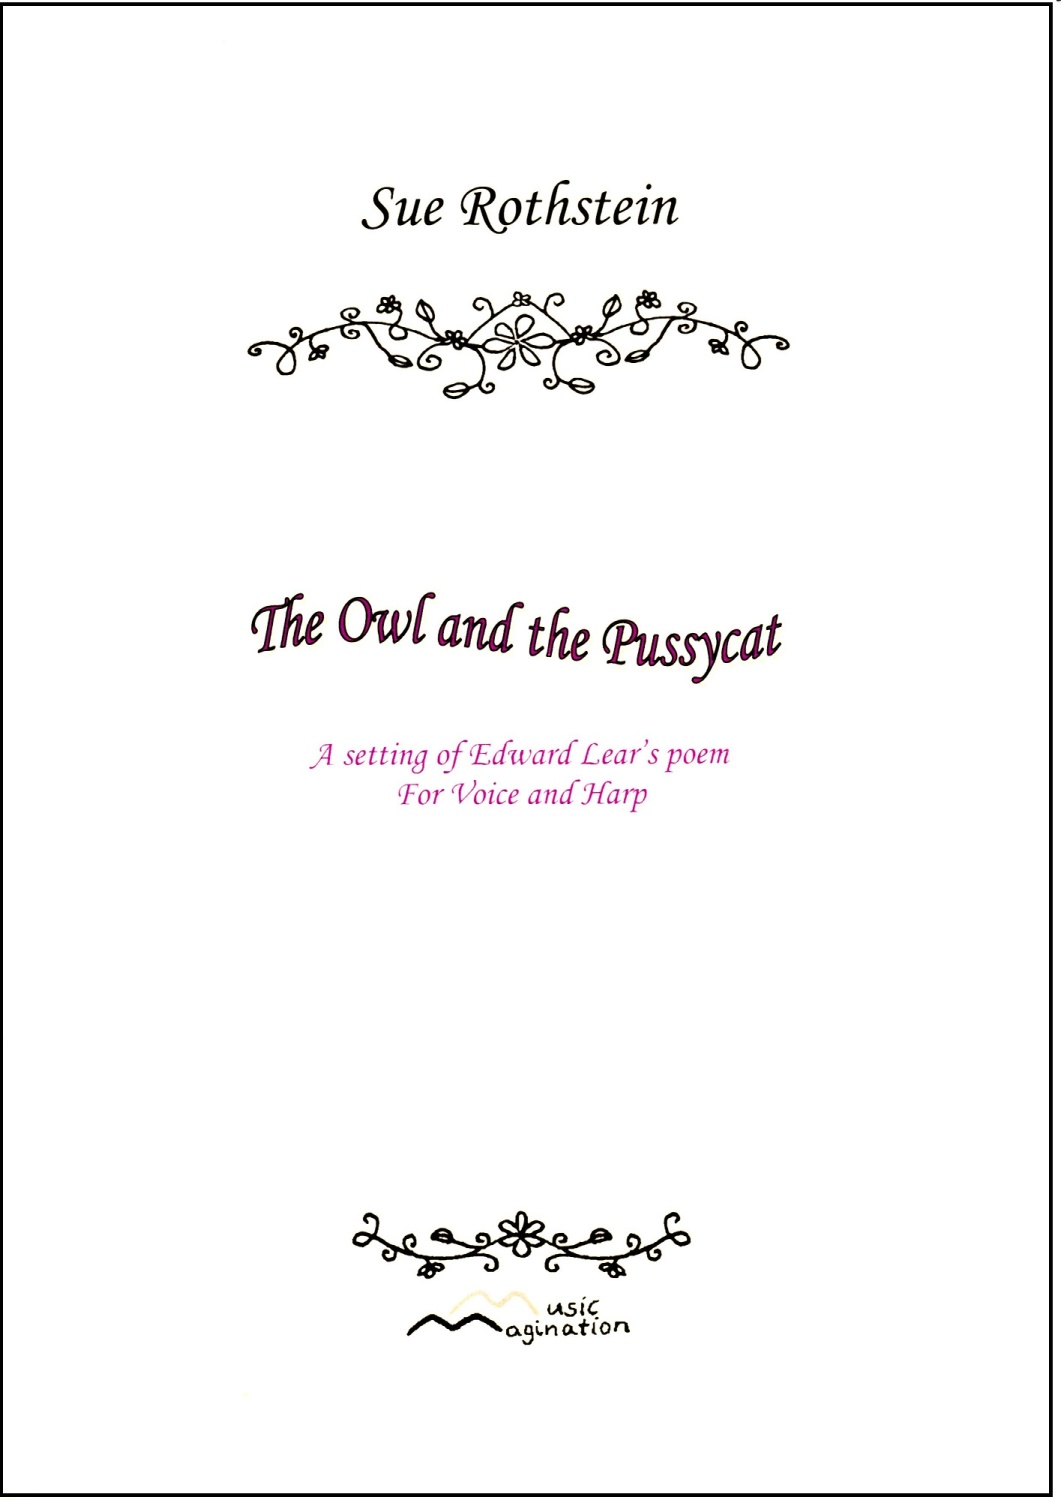 The Owl and the Pussycat - Sue Rothstein